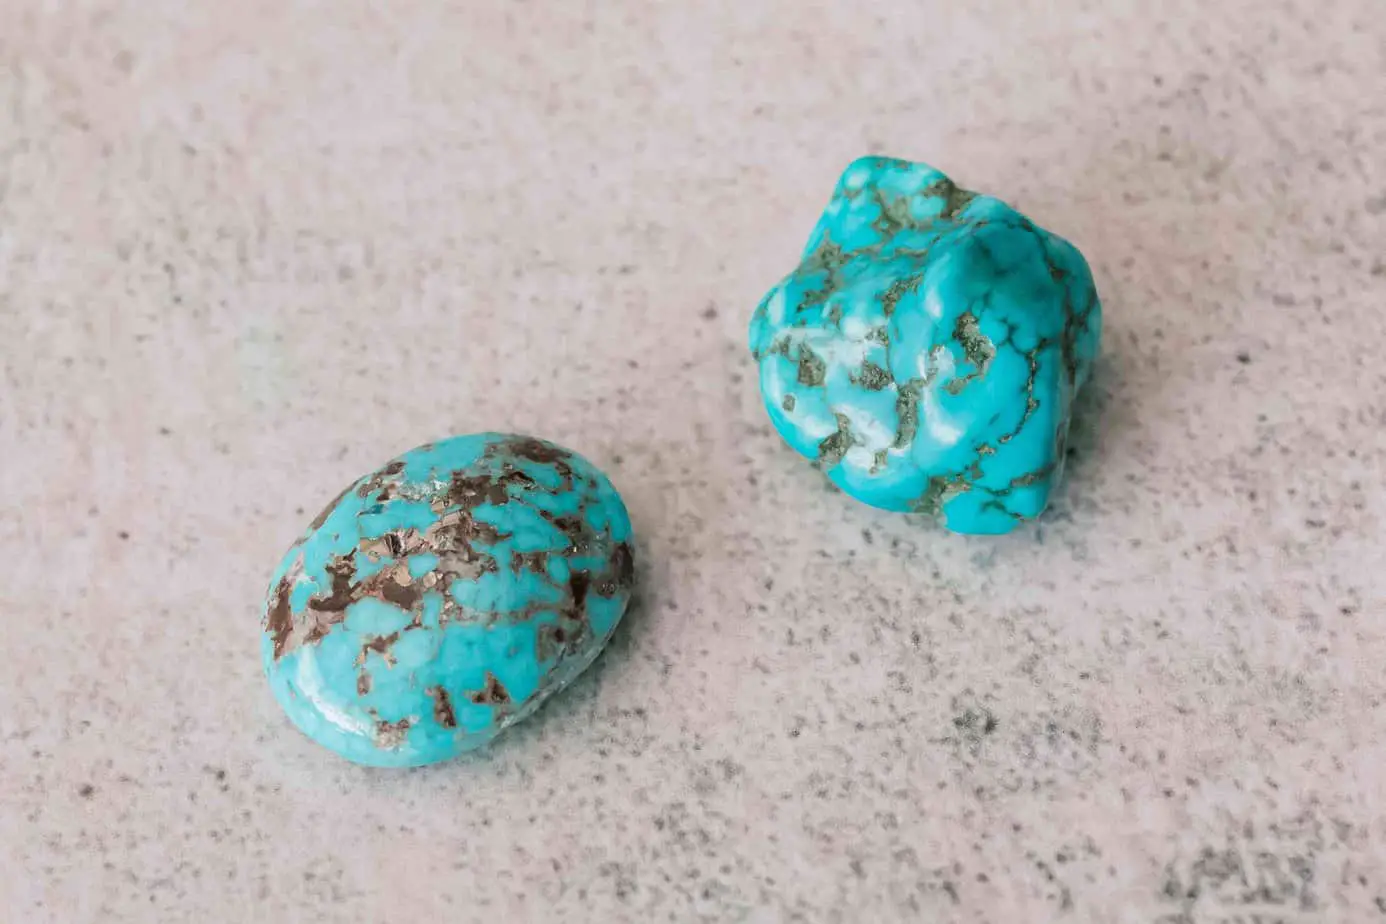 Metaphysical Properties Of African Turquoise